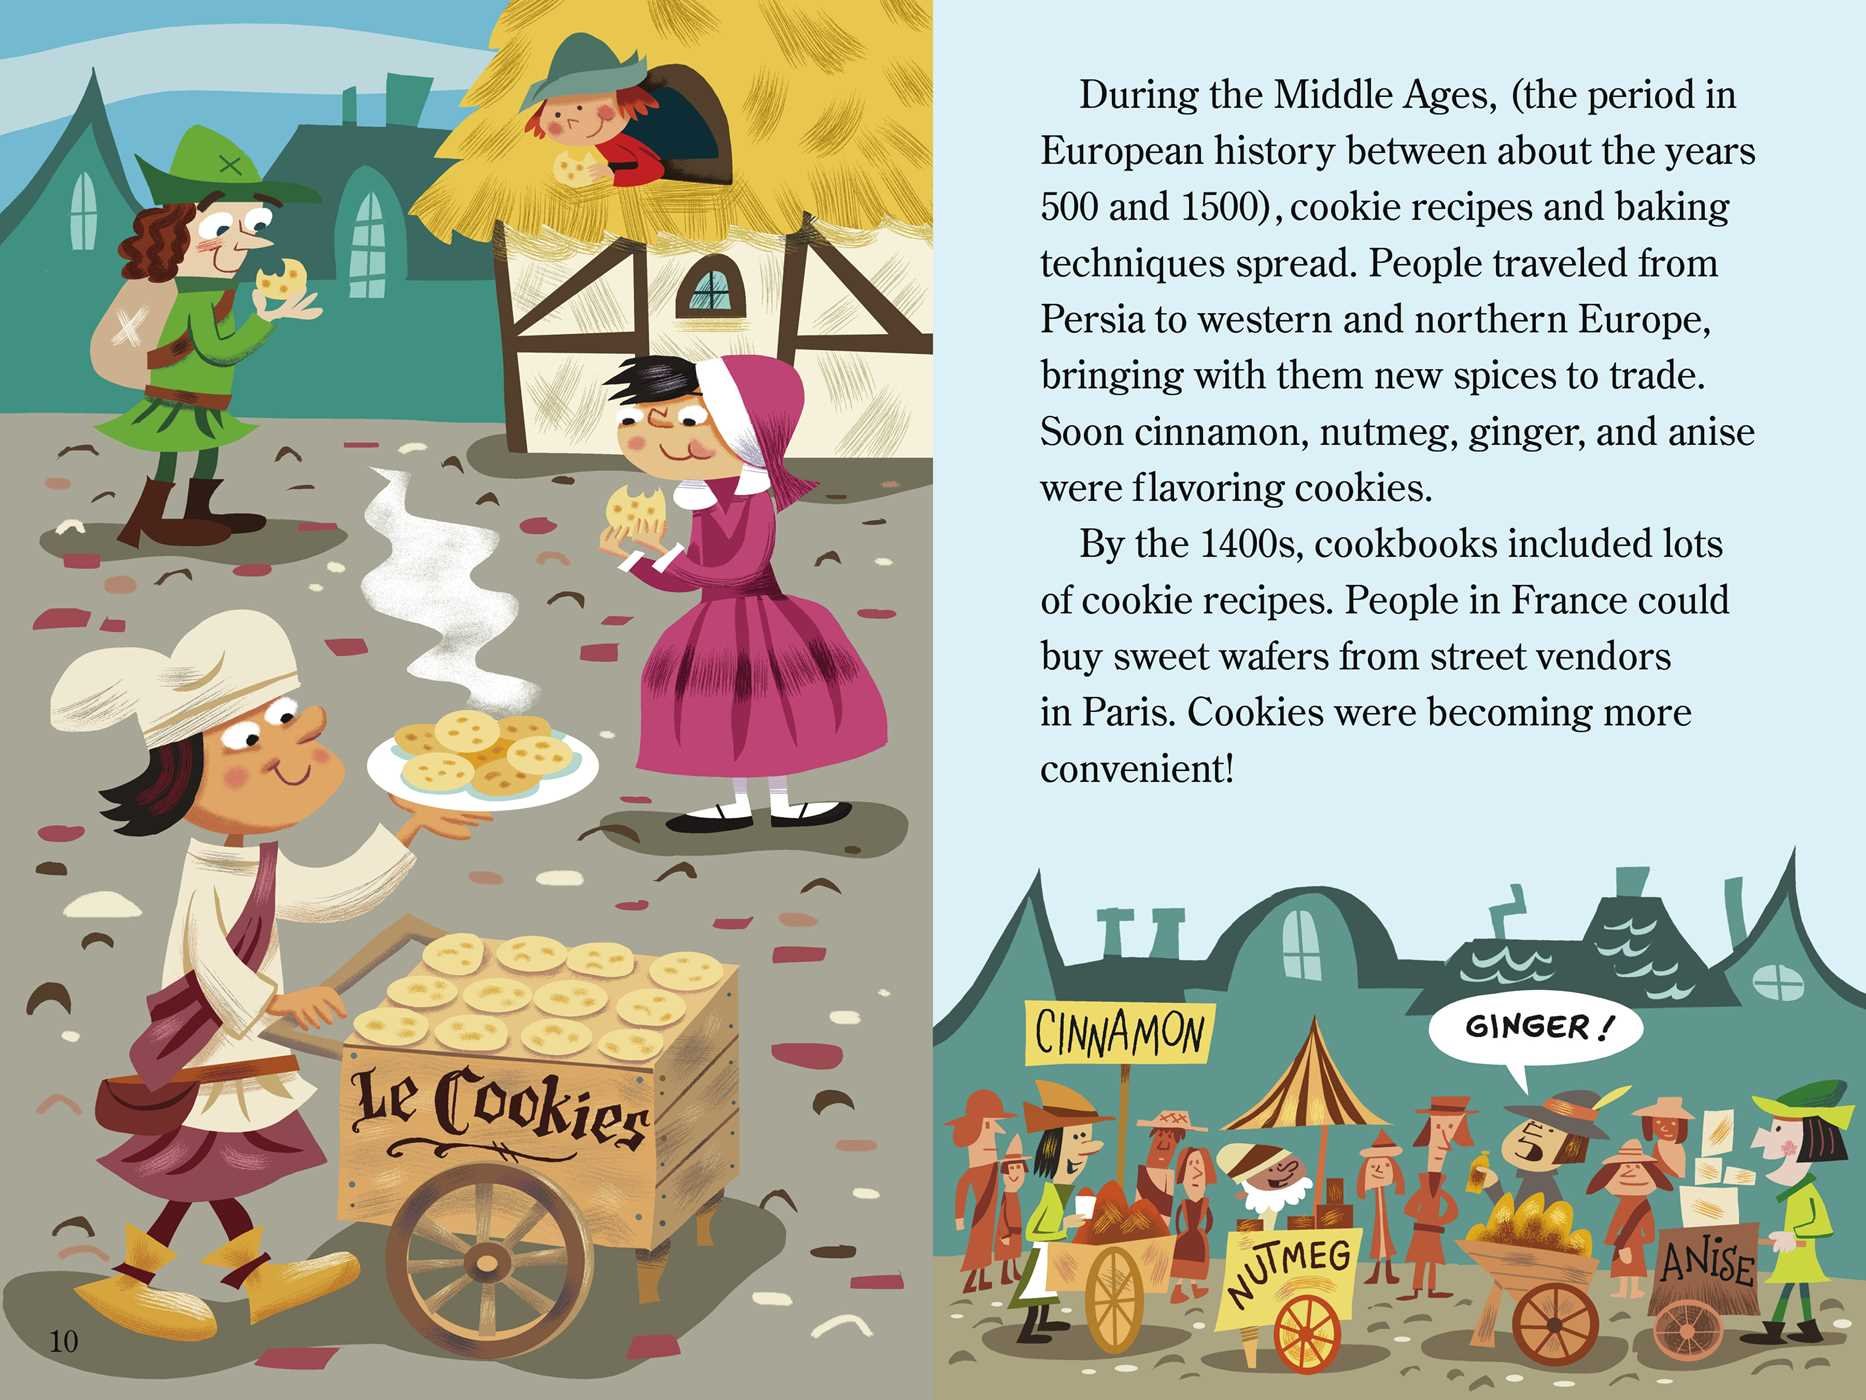 celebrate-picture-books-picture-book-review-the-way-the-cookie-crumbled-vendors